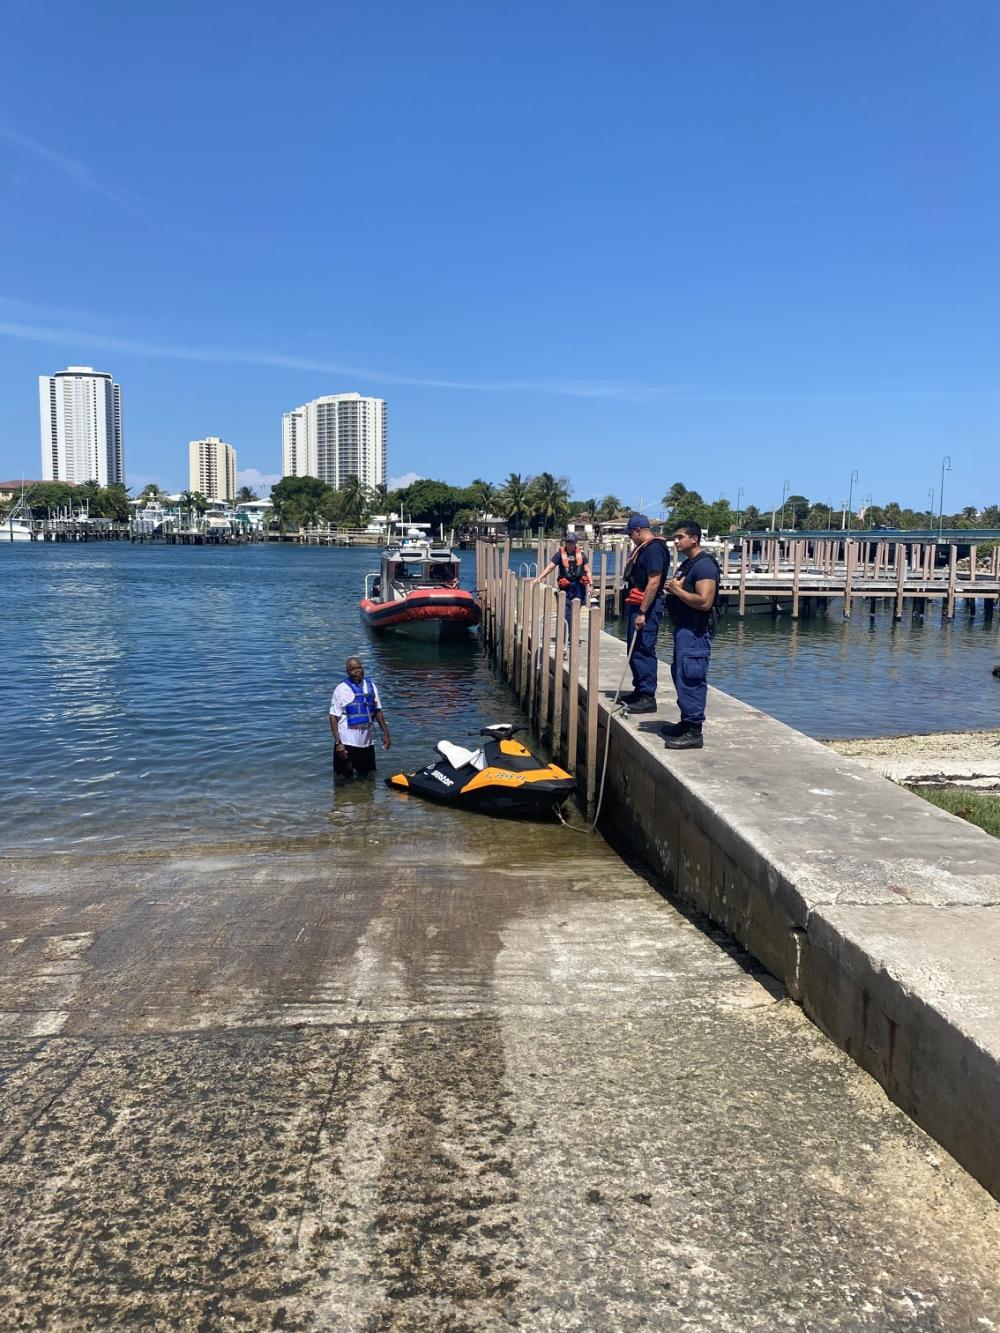 Coast Guard Station Lake Worth Inlet small boat crew towed a personal watercraft after it capsized to Phil Foster State Park, Florida, May 28, 2022. The small boat crew rescued two people from the water from the capsized personal watercraft with no reported medical concerns. (U.S. Coast Guard photo by Station Lake Worth Inlet)